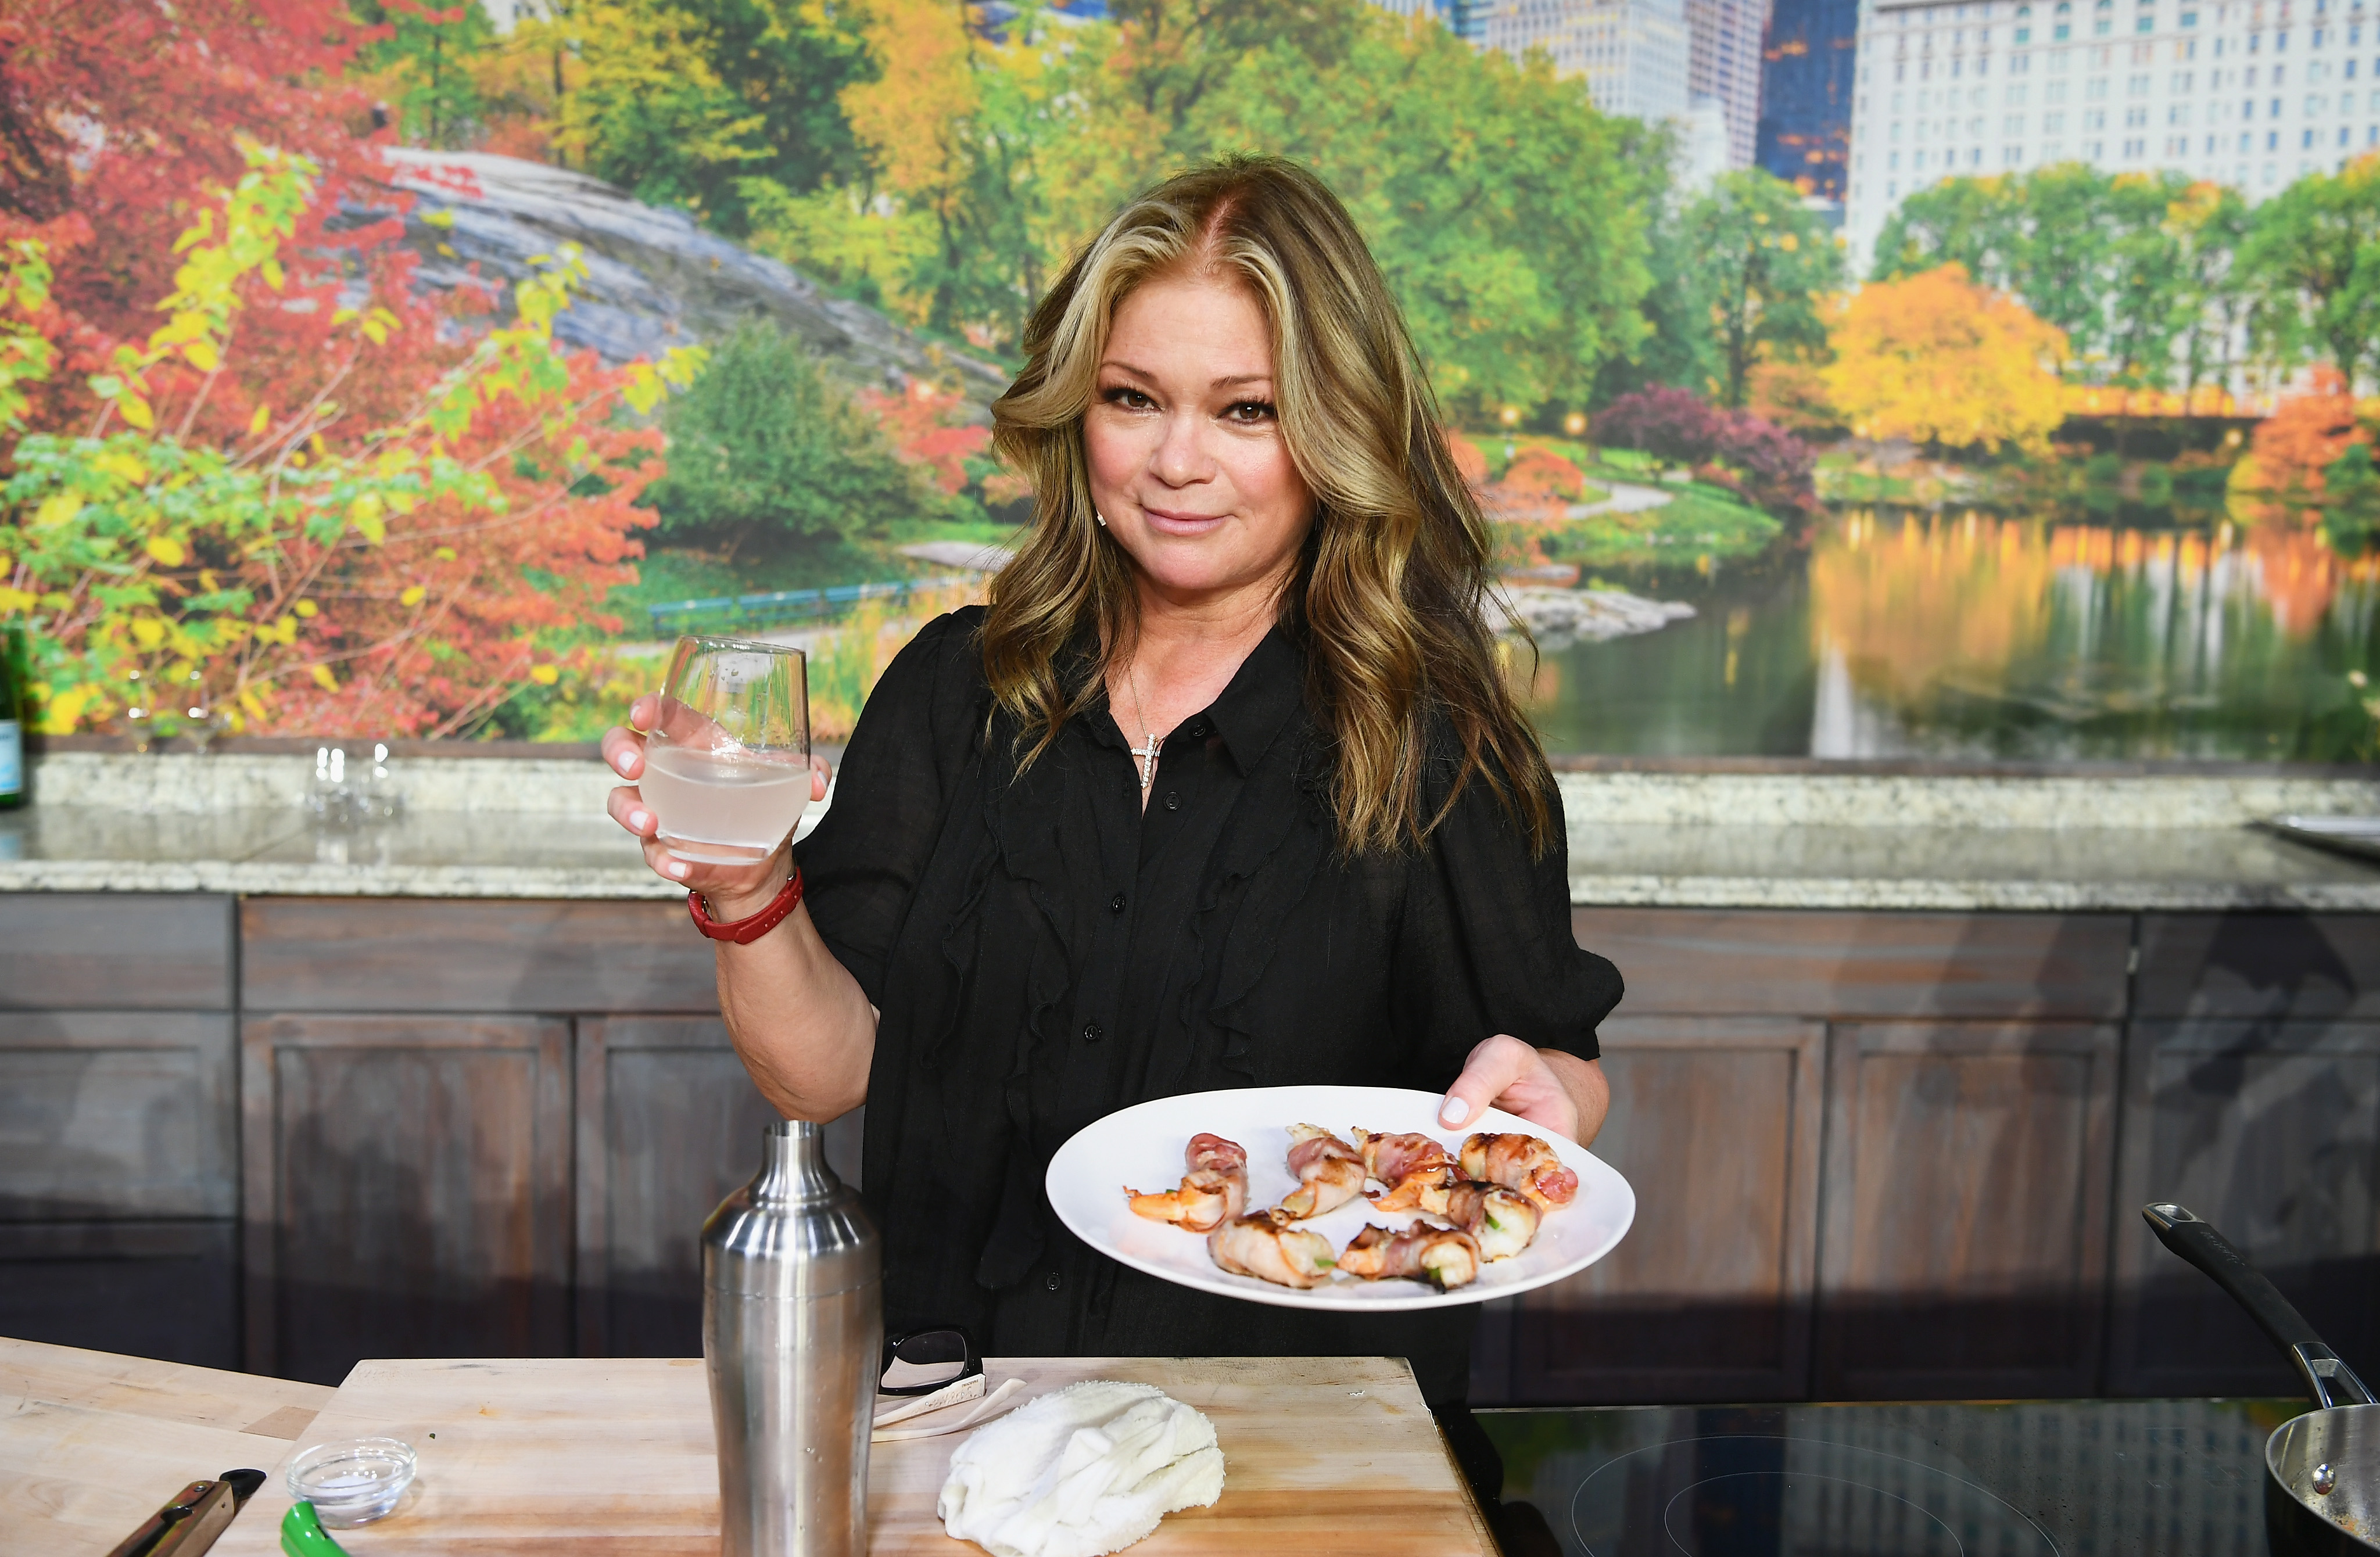 Food Network personality Valerie Bertinelli attends a Food Network event and shows off a prepared meal with a cocktail.